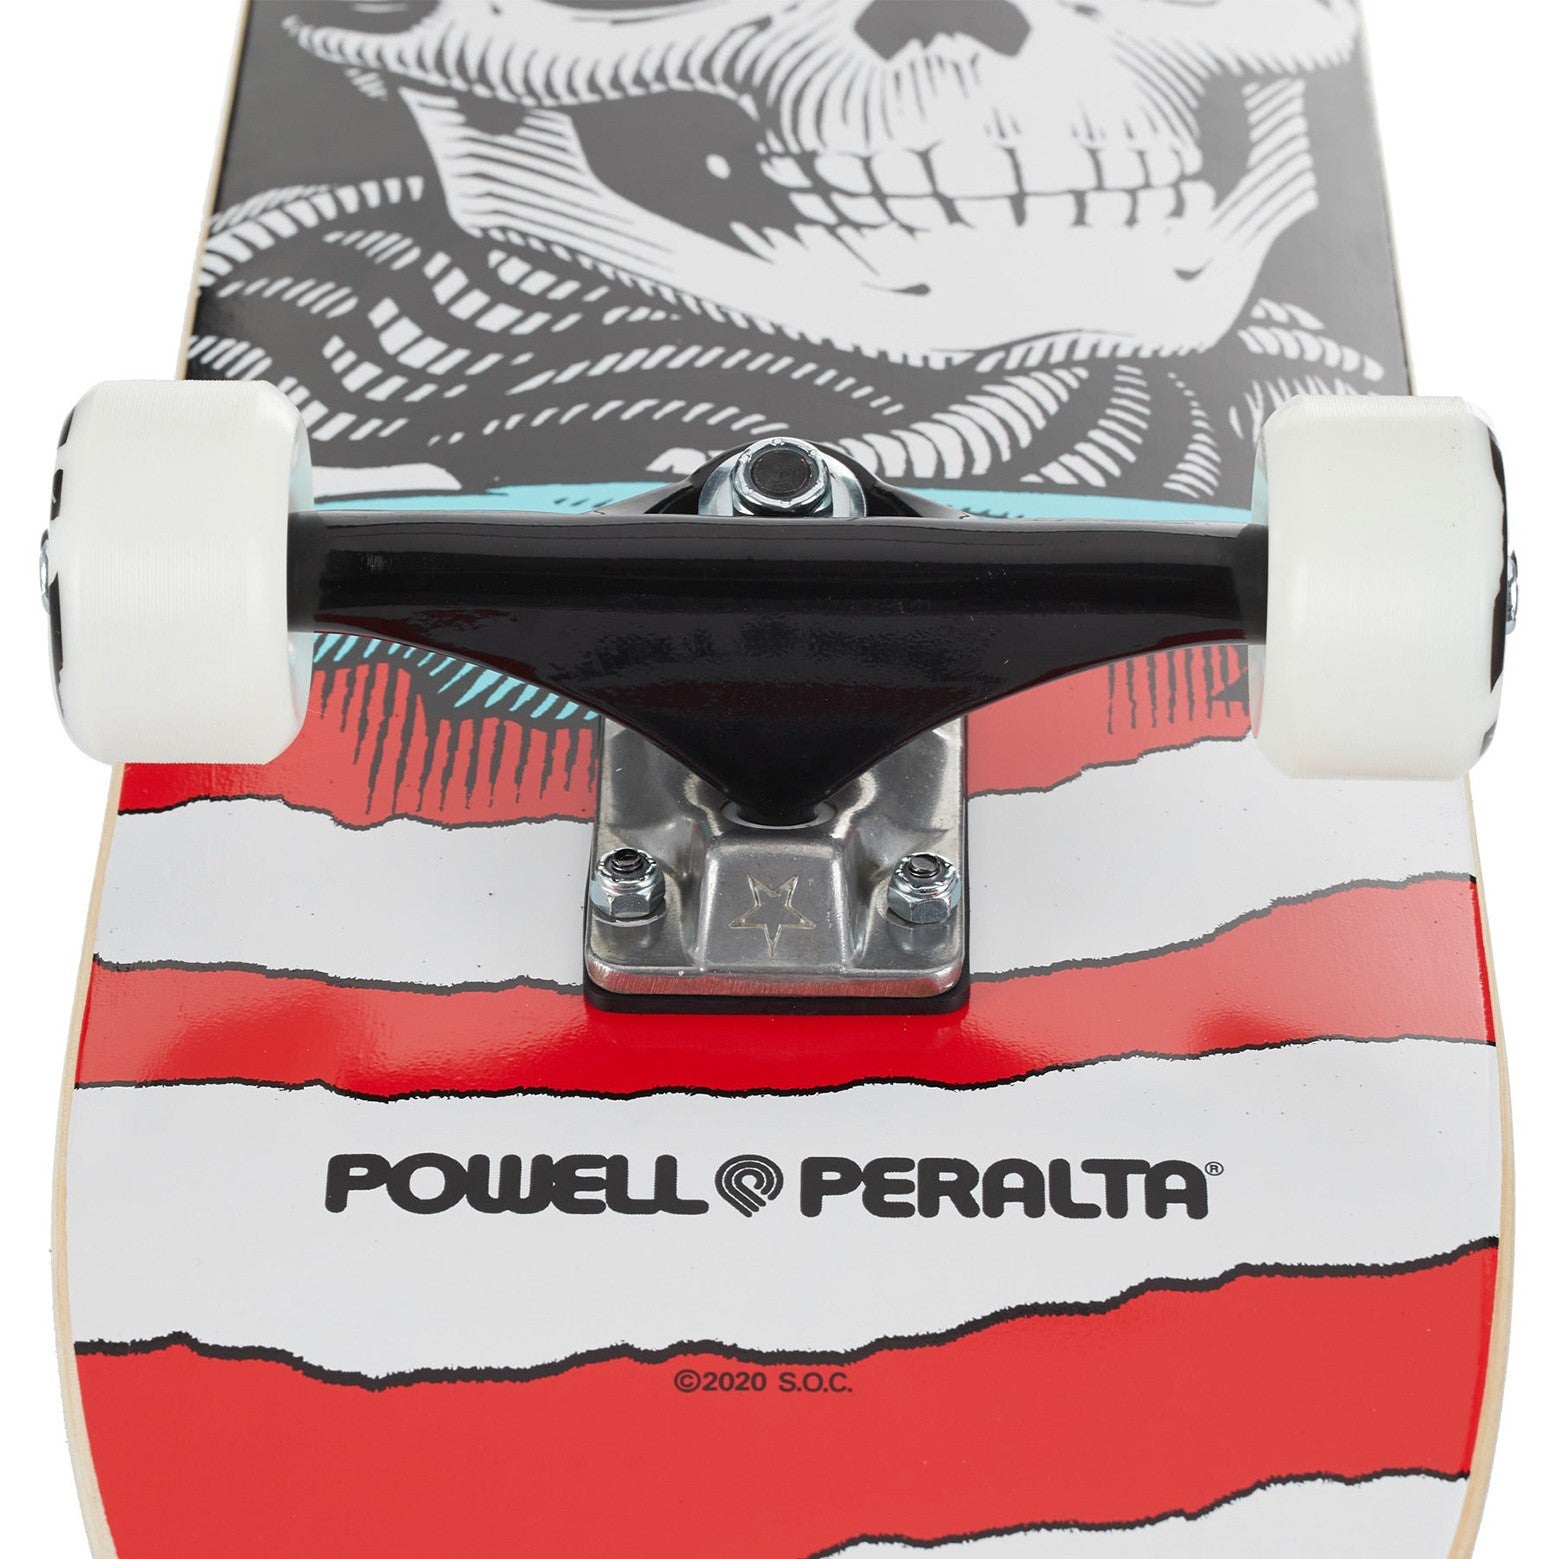 Powell Peralta - Ripper Complete 8.0 x 31.45 Inch - RED